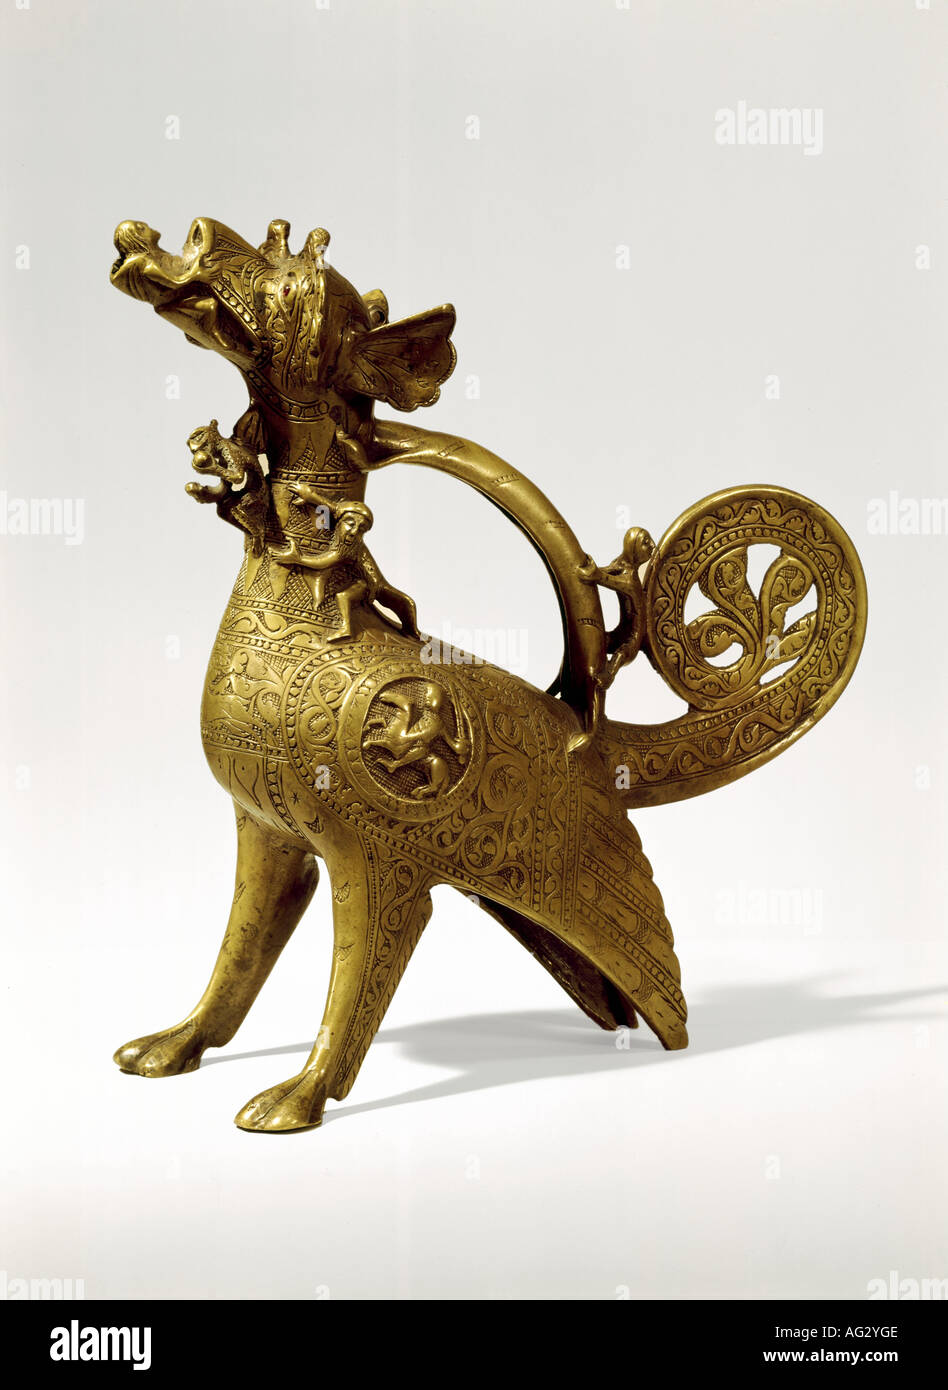 fine arts, handcraft, dragon aquamanile, 13th century, bronze, Museum for fine arts and trade, Hamburg, Germany, Artist's Copyright has not to be cleared Stock Photo